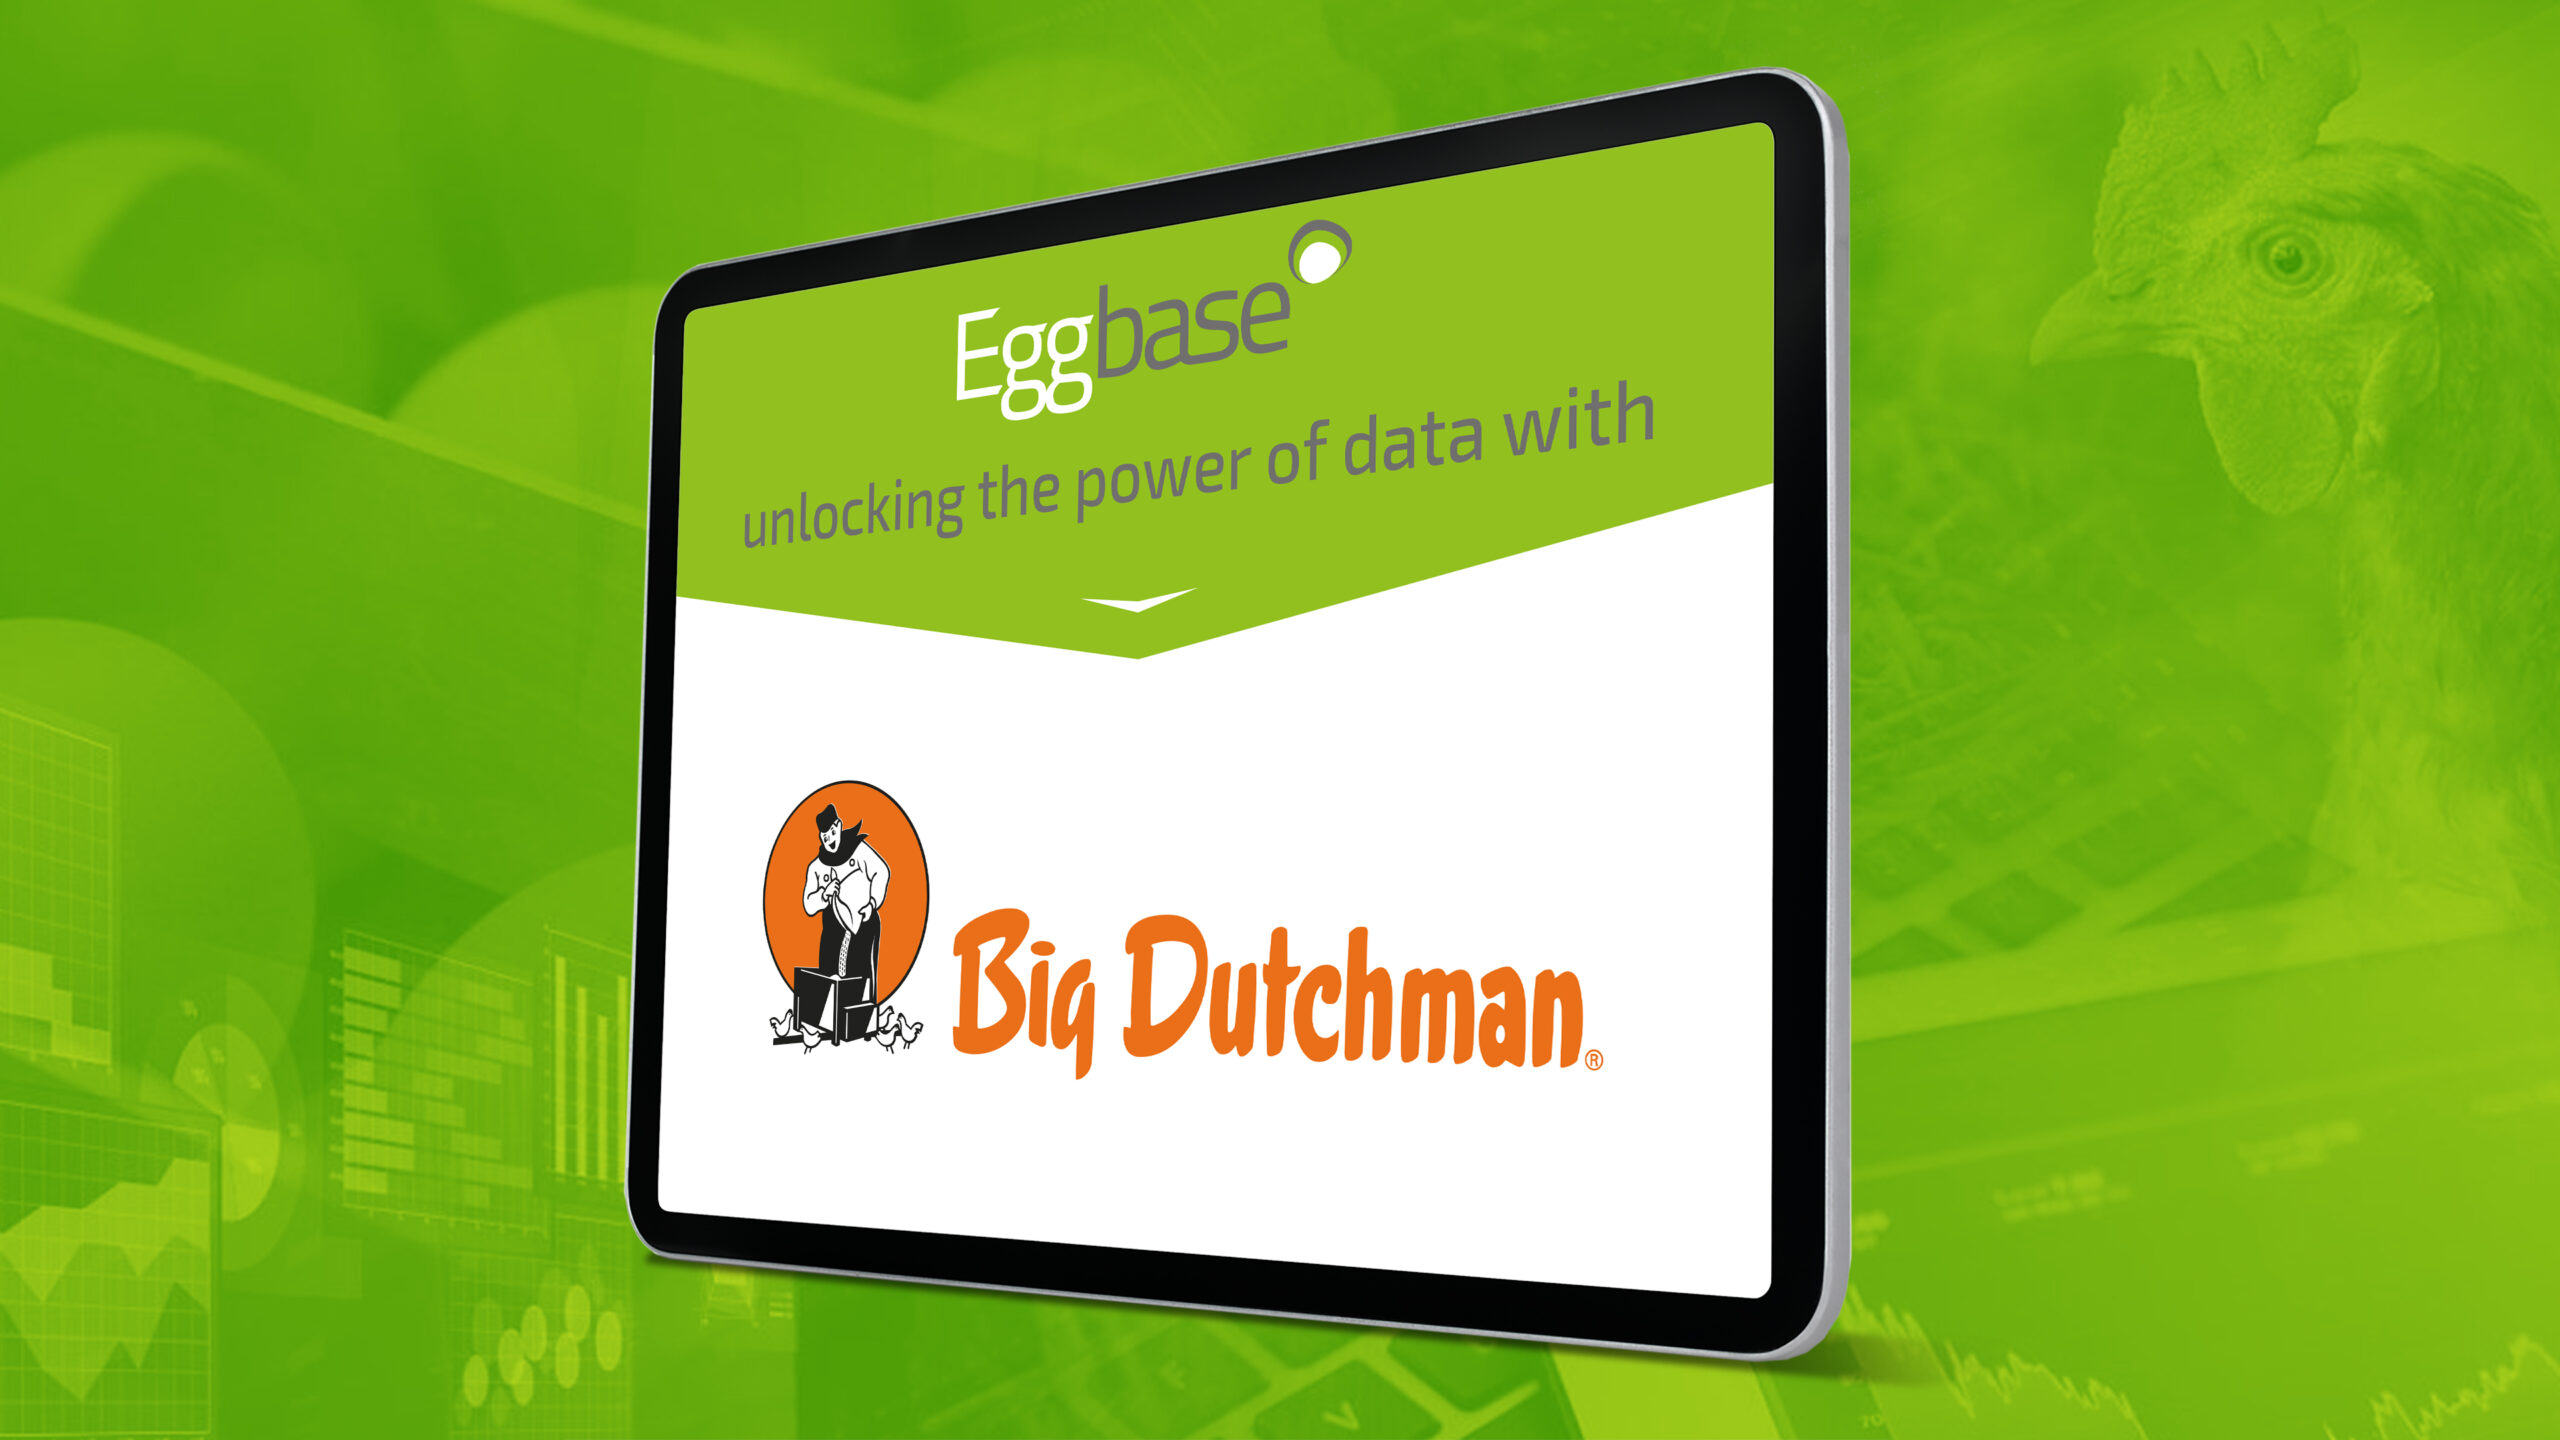 Eggbase and Newquip Announce Smooth Integration With Big Dutchman to Bring Data Into the Eggsense Platform